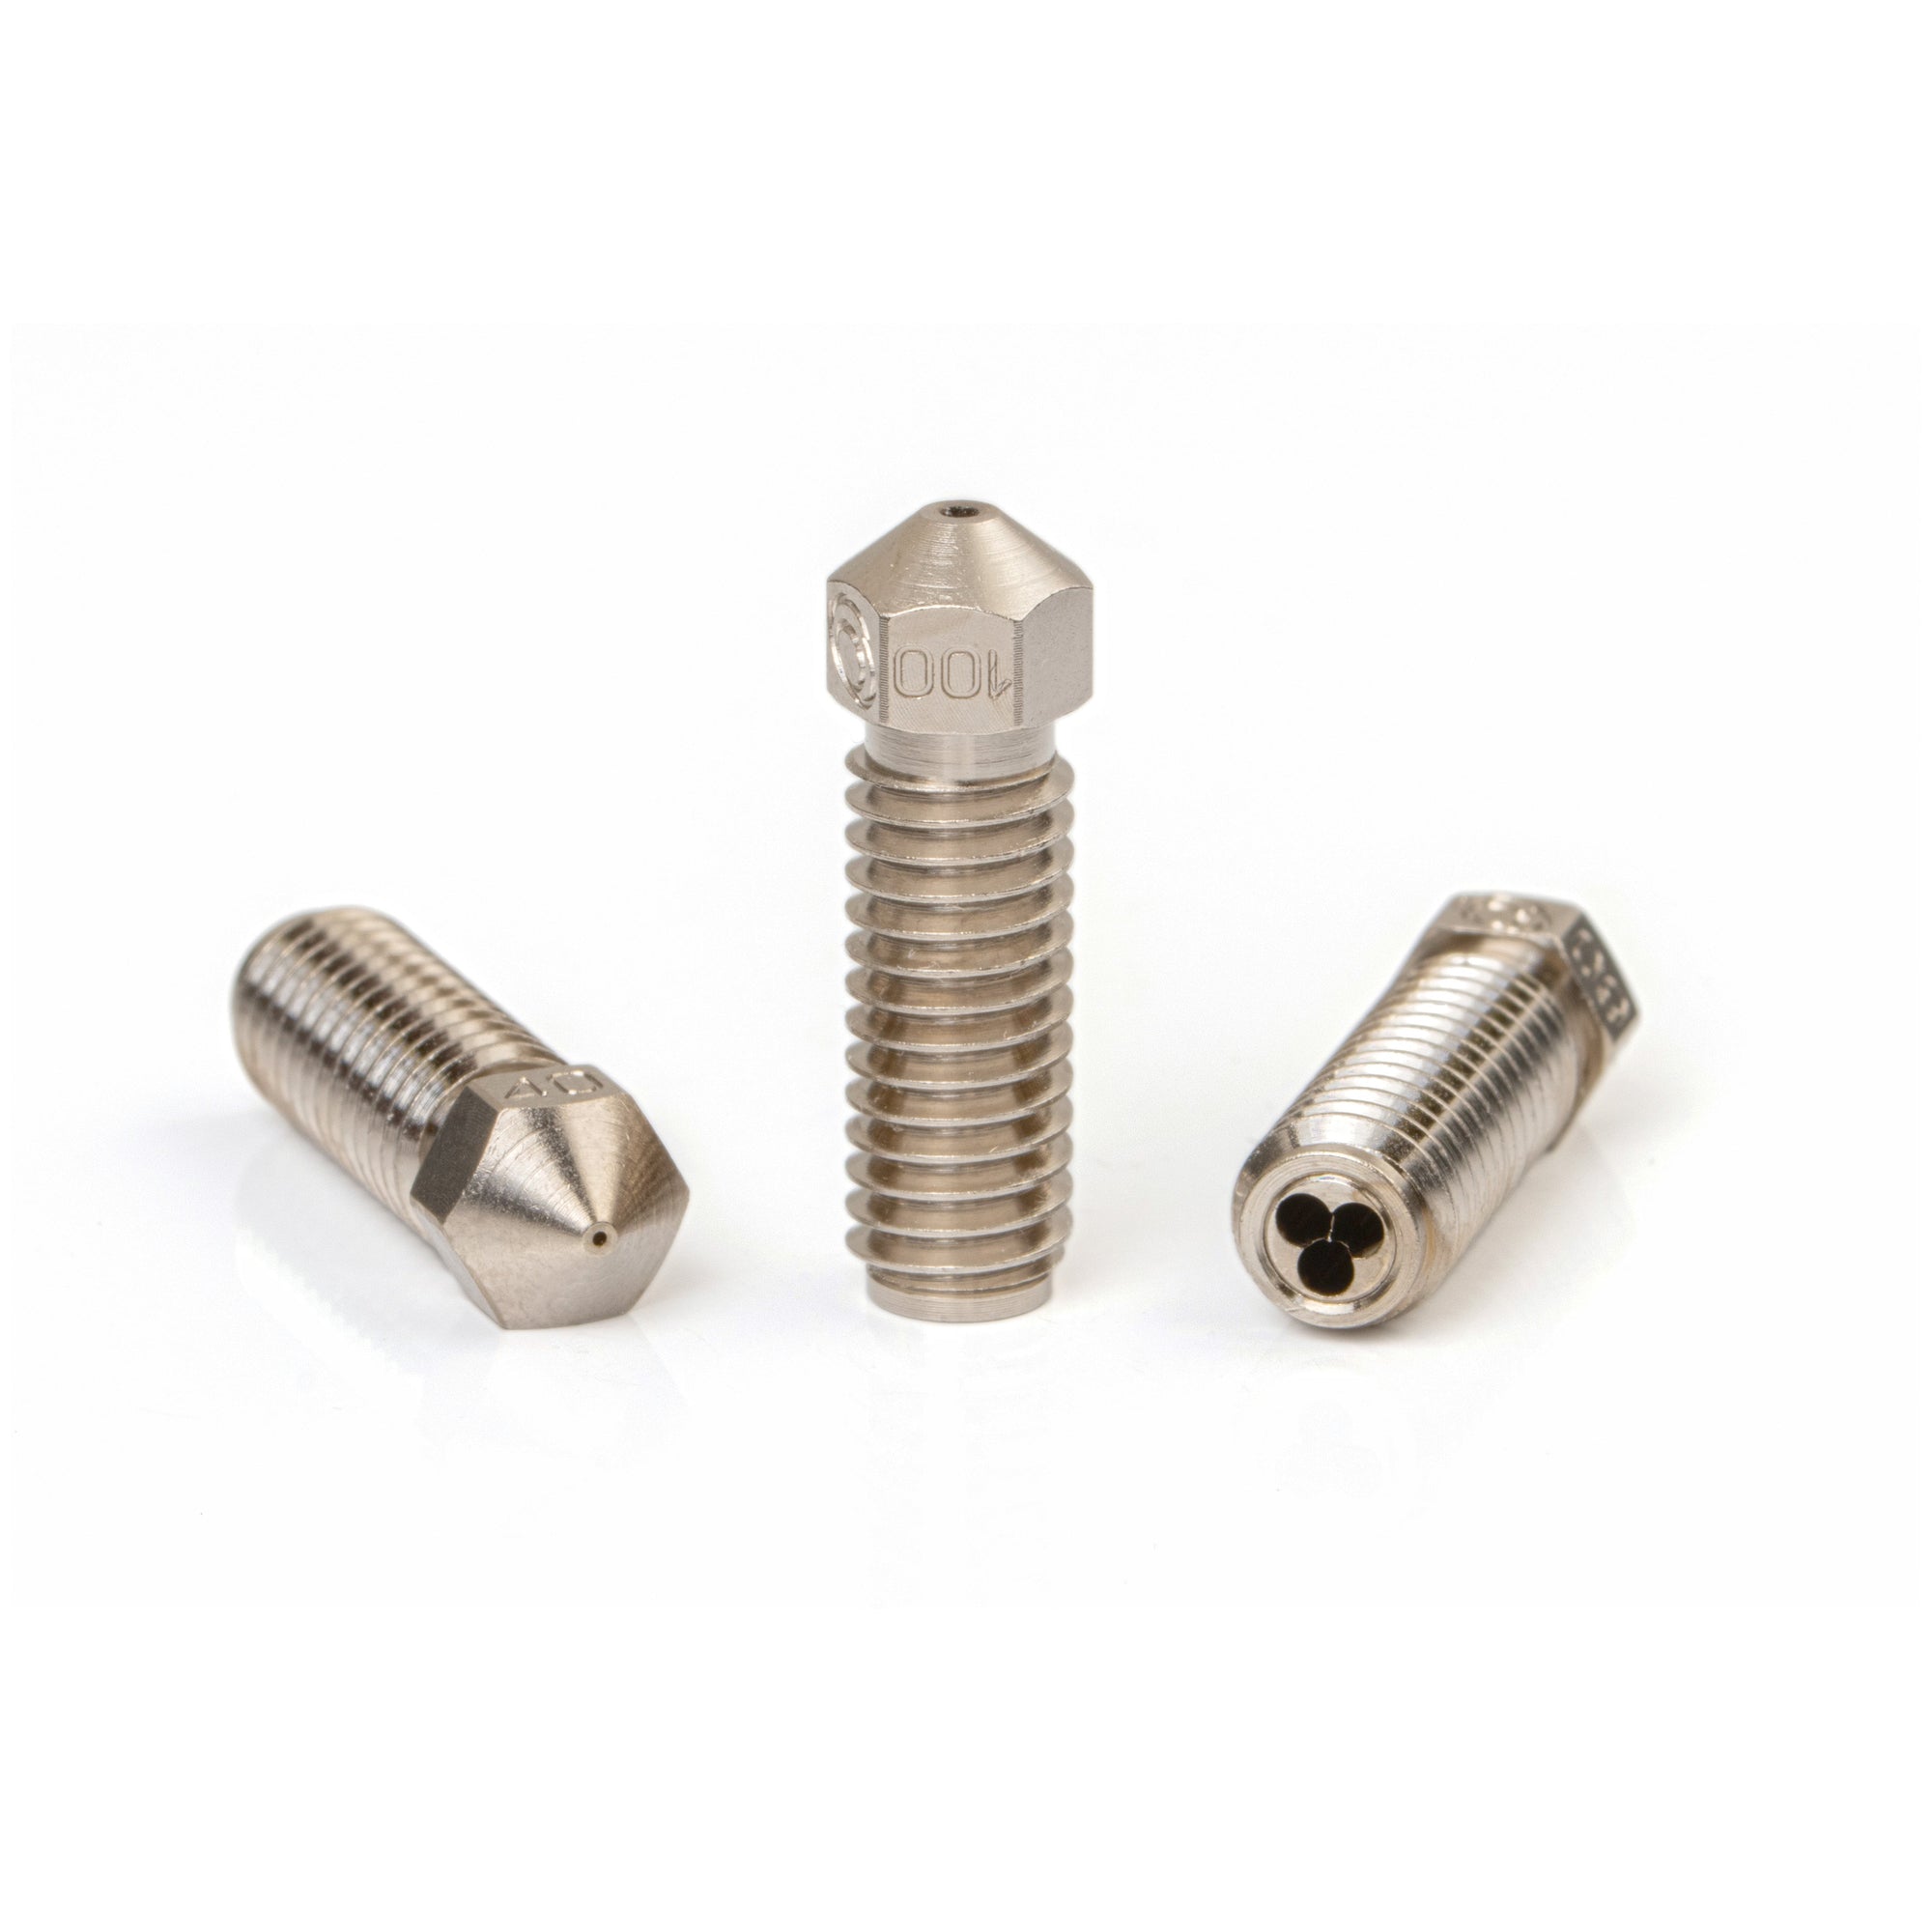 Bondtech CHT™ Coated Brass Nozzle (Volcano Compatible)